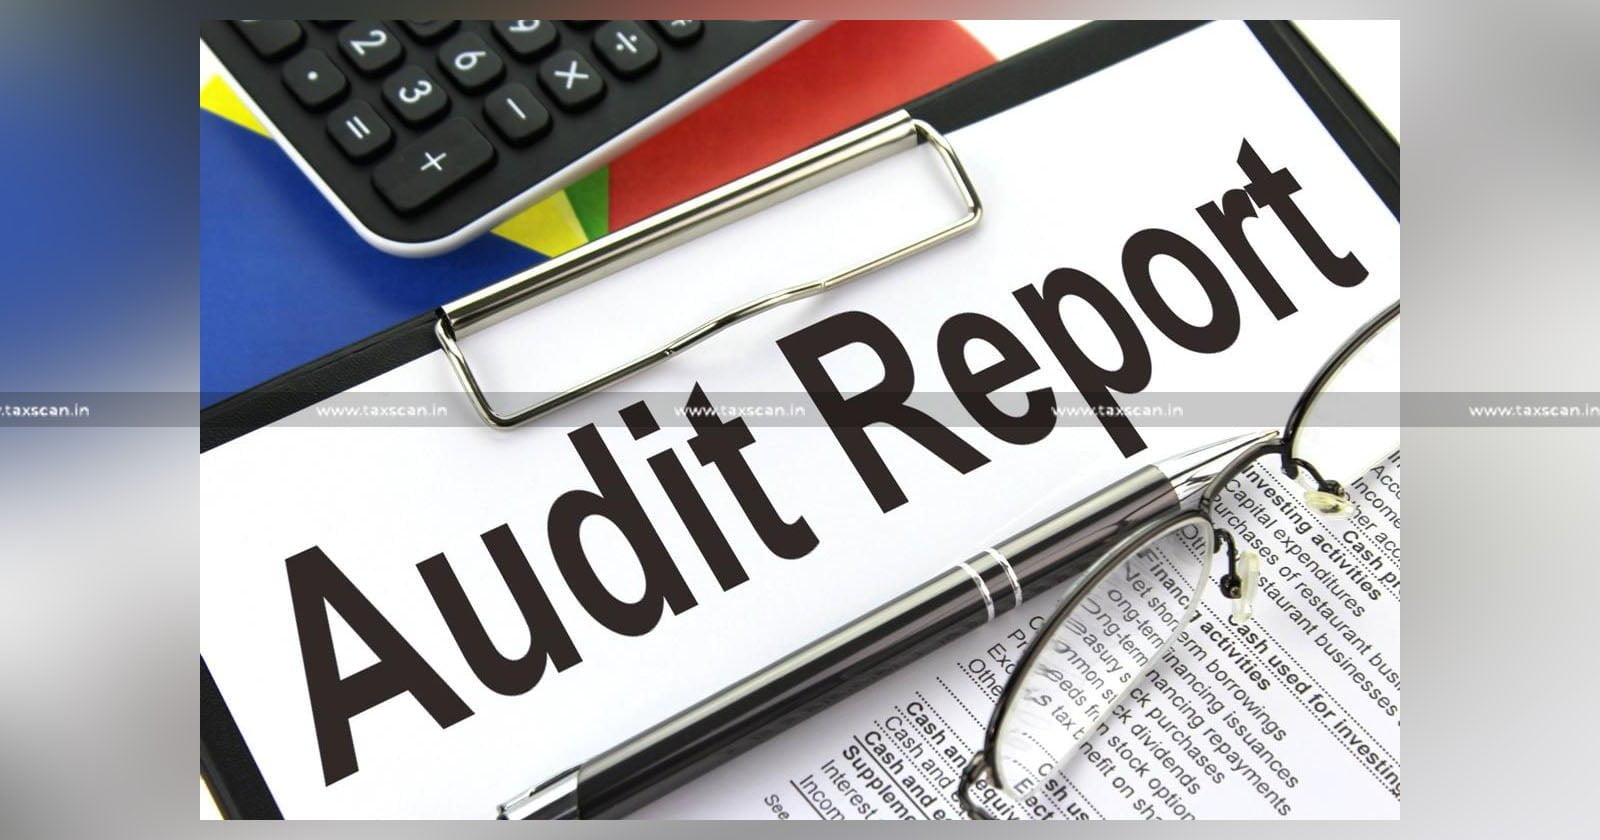 Demand- Service Tax- Based Audit Report of IOCL -Income Tax Department’s information- CESTAT- service tax- audit report- income tax- income- tax- department- Form 26AS is not Valid- valid-taxscan